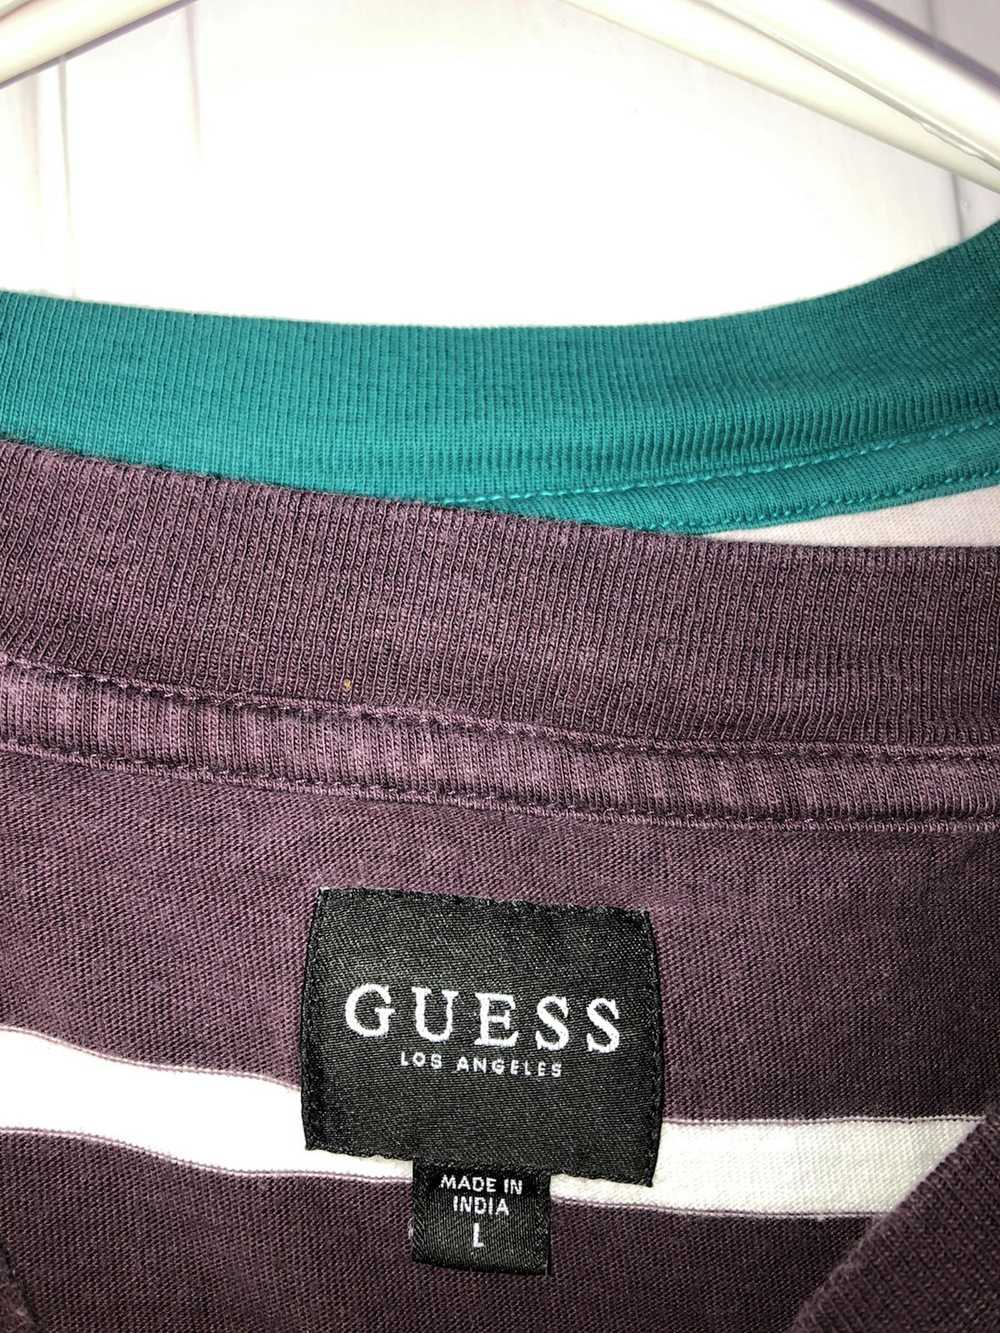 Guess Guess Los Angeles Purple and white stripped… - image 2